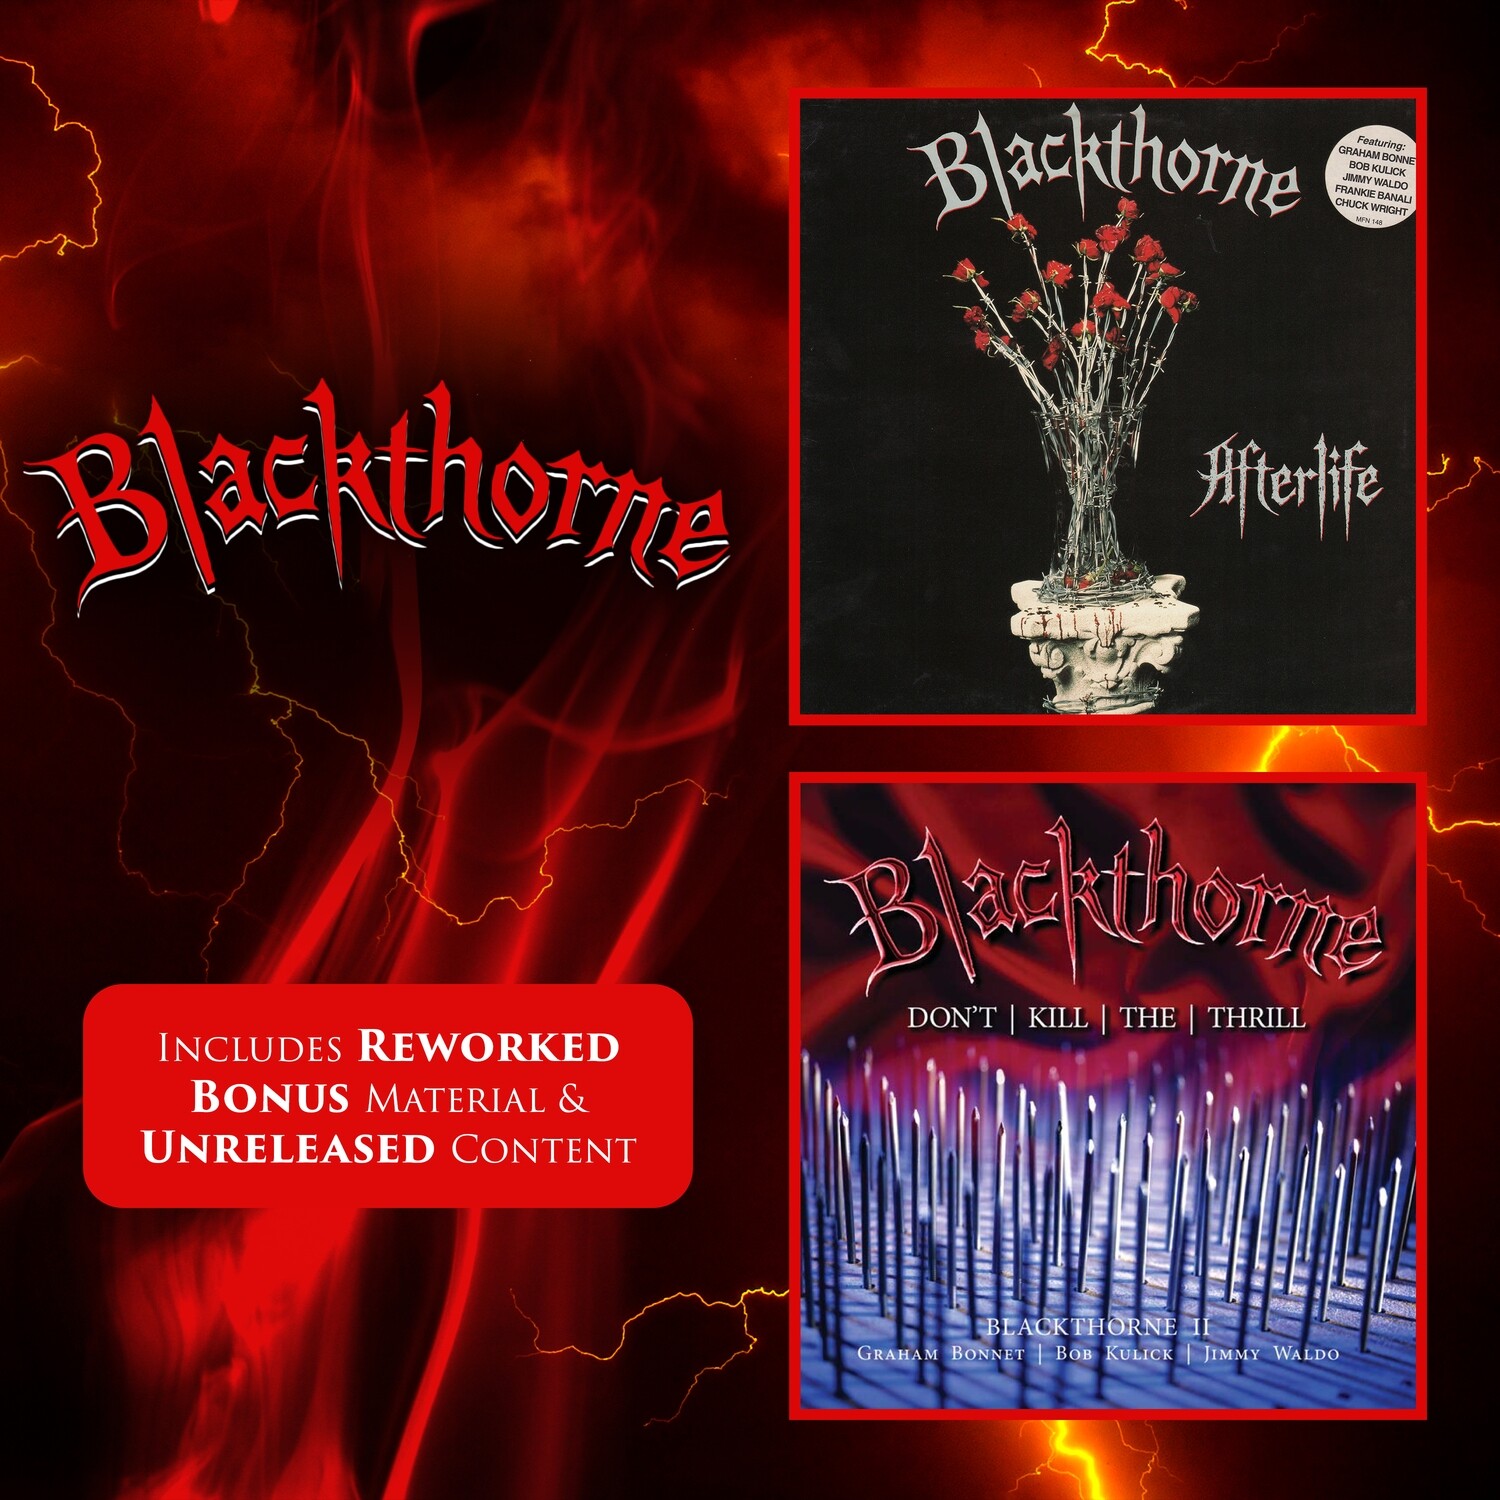 SFMTFCD555 - Blackthorne - Afterlife/Don't Kill The Thrill